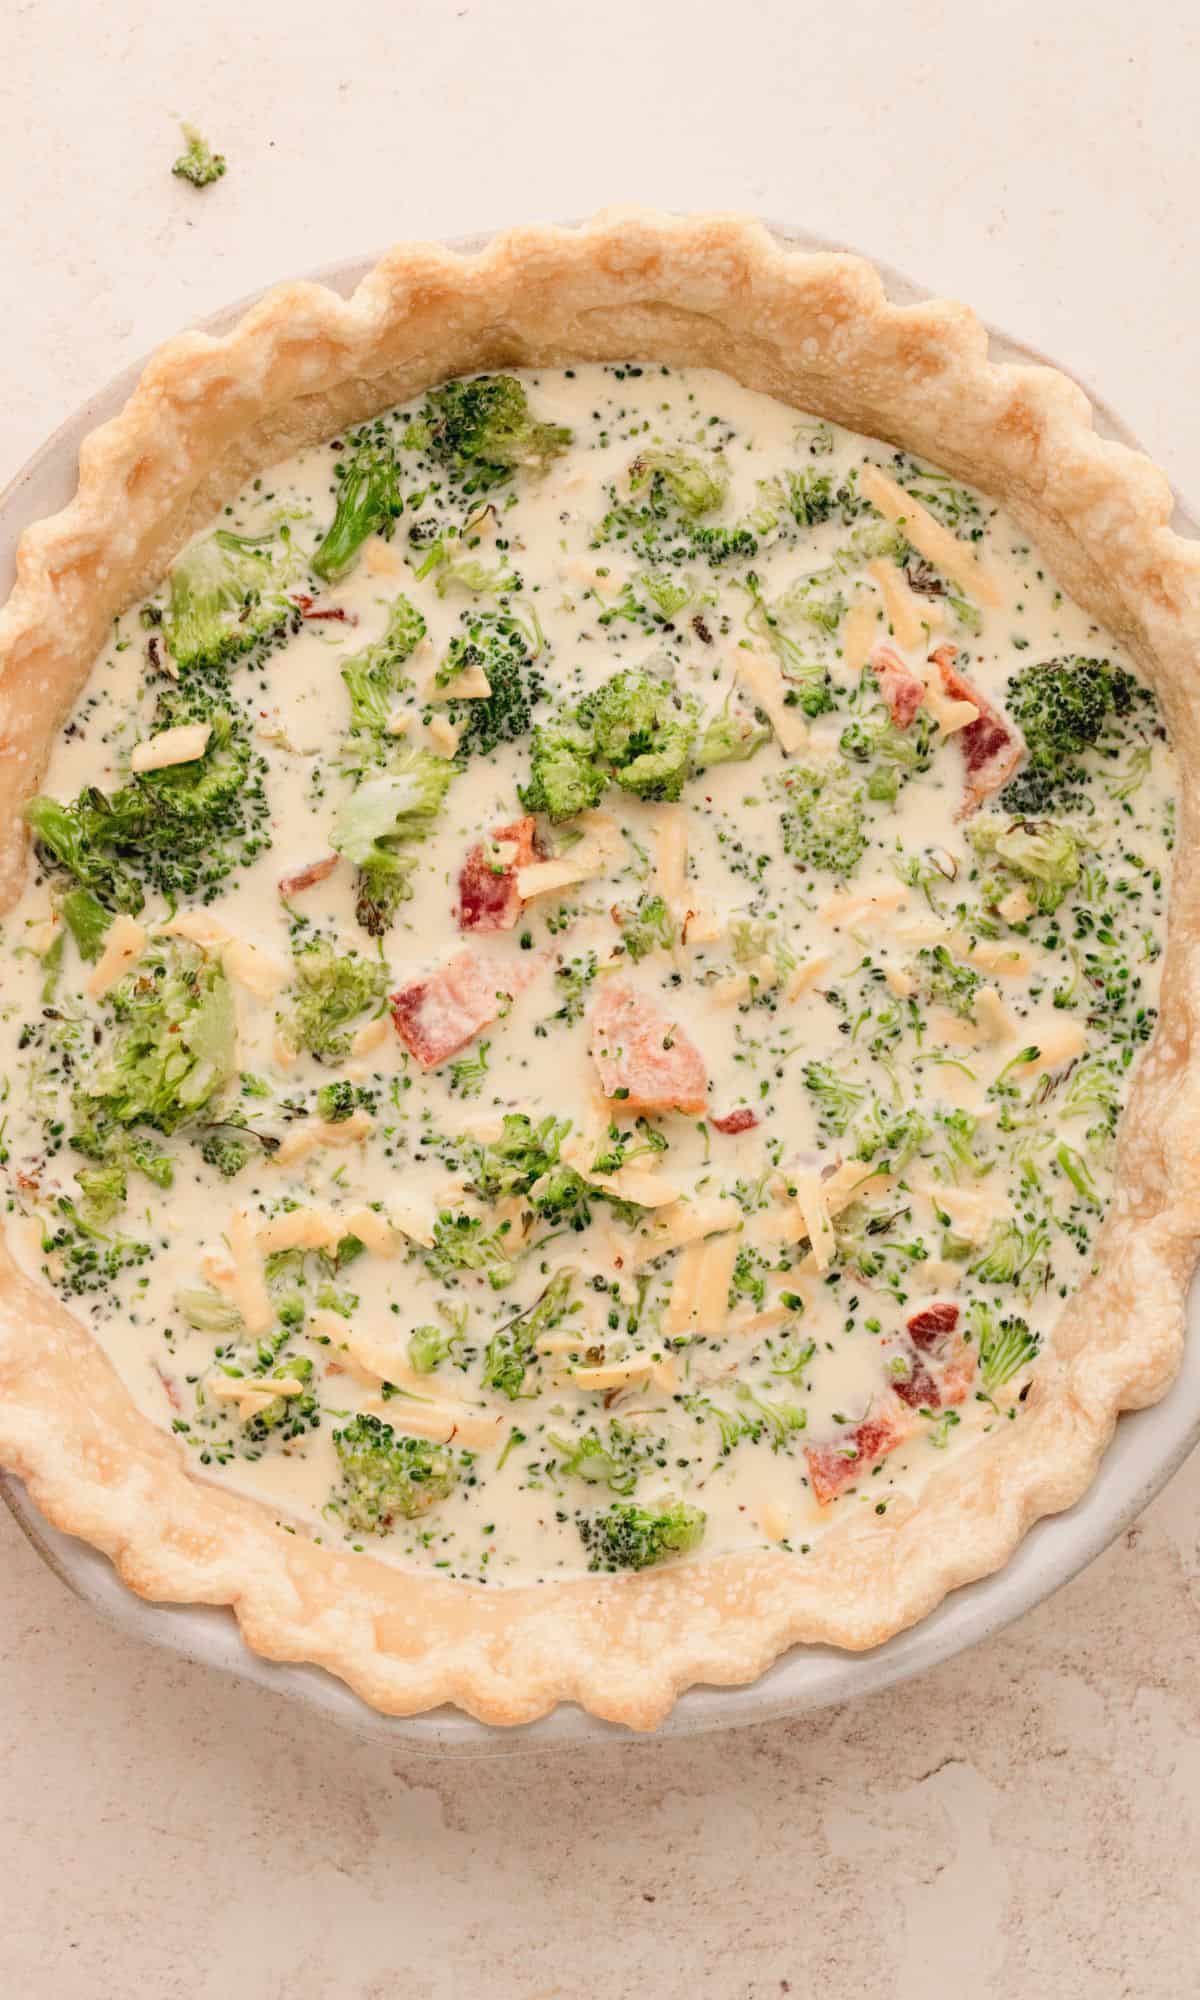 Unbaked filled pie crust with quiche filling.